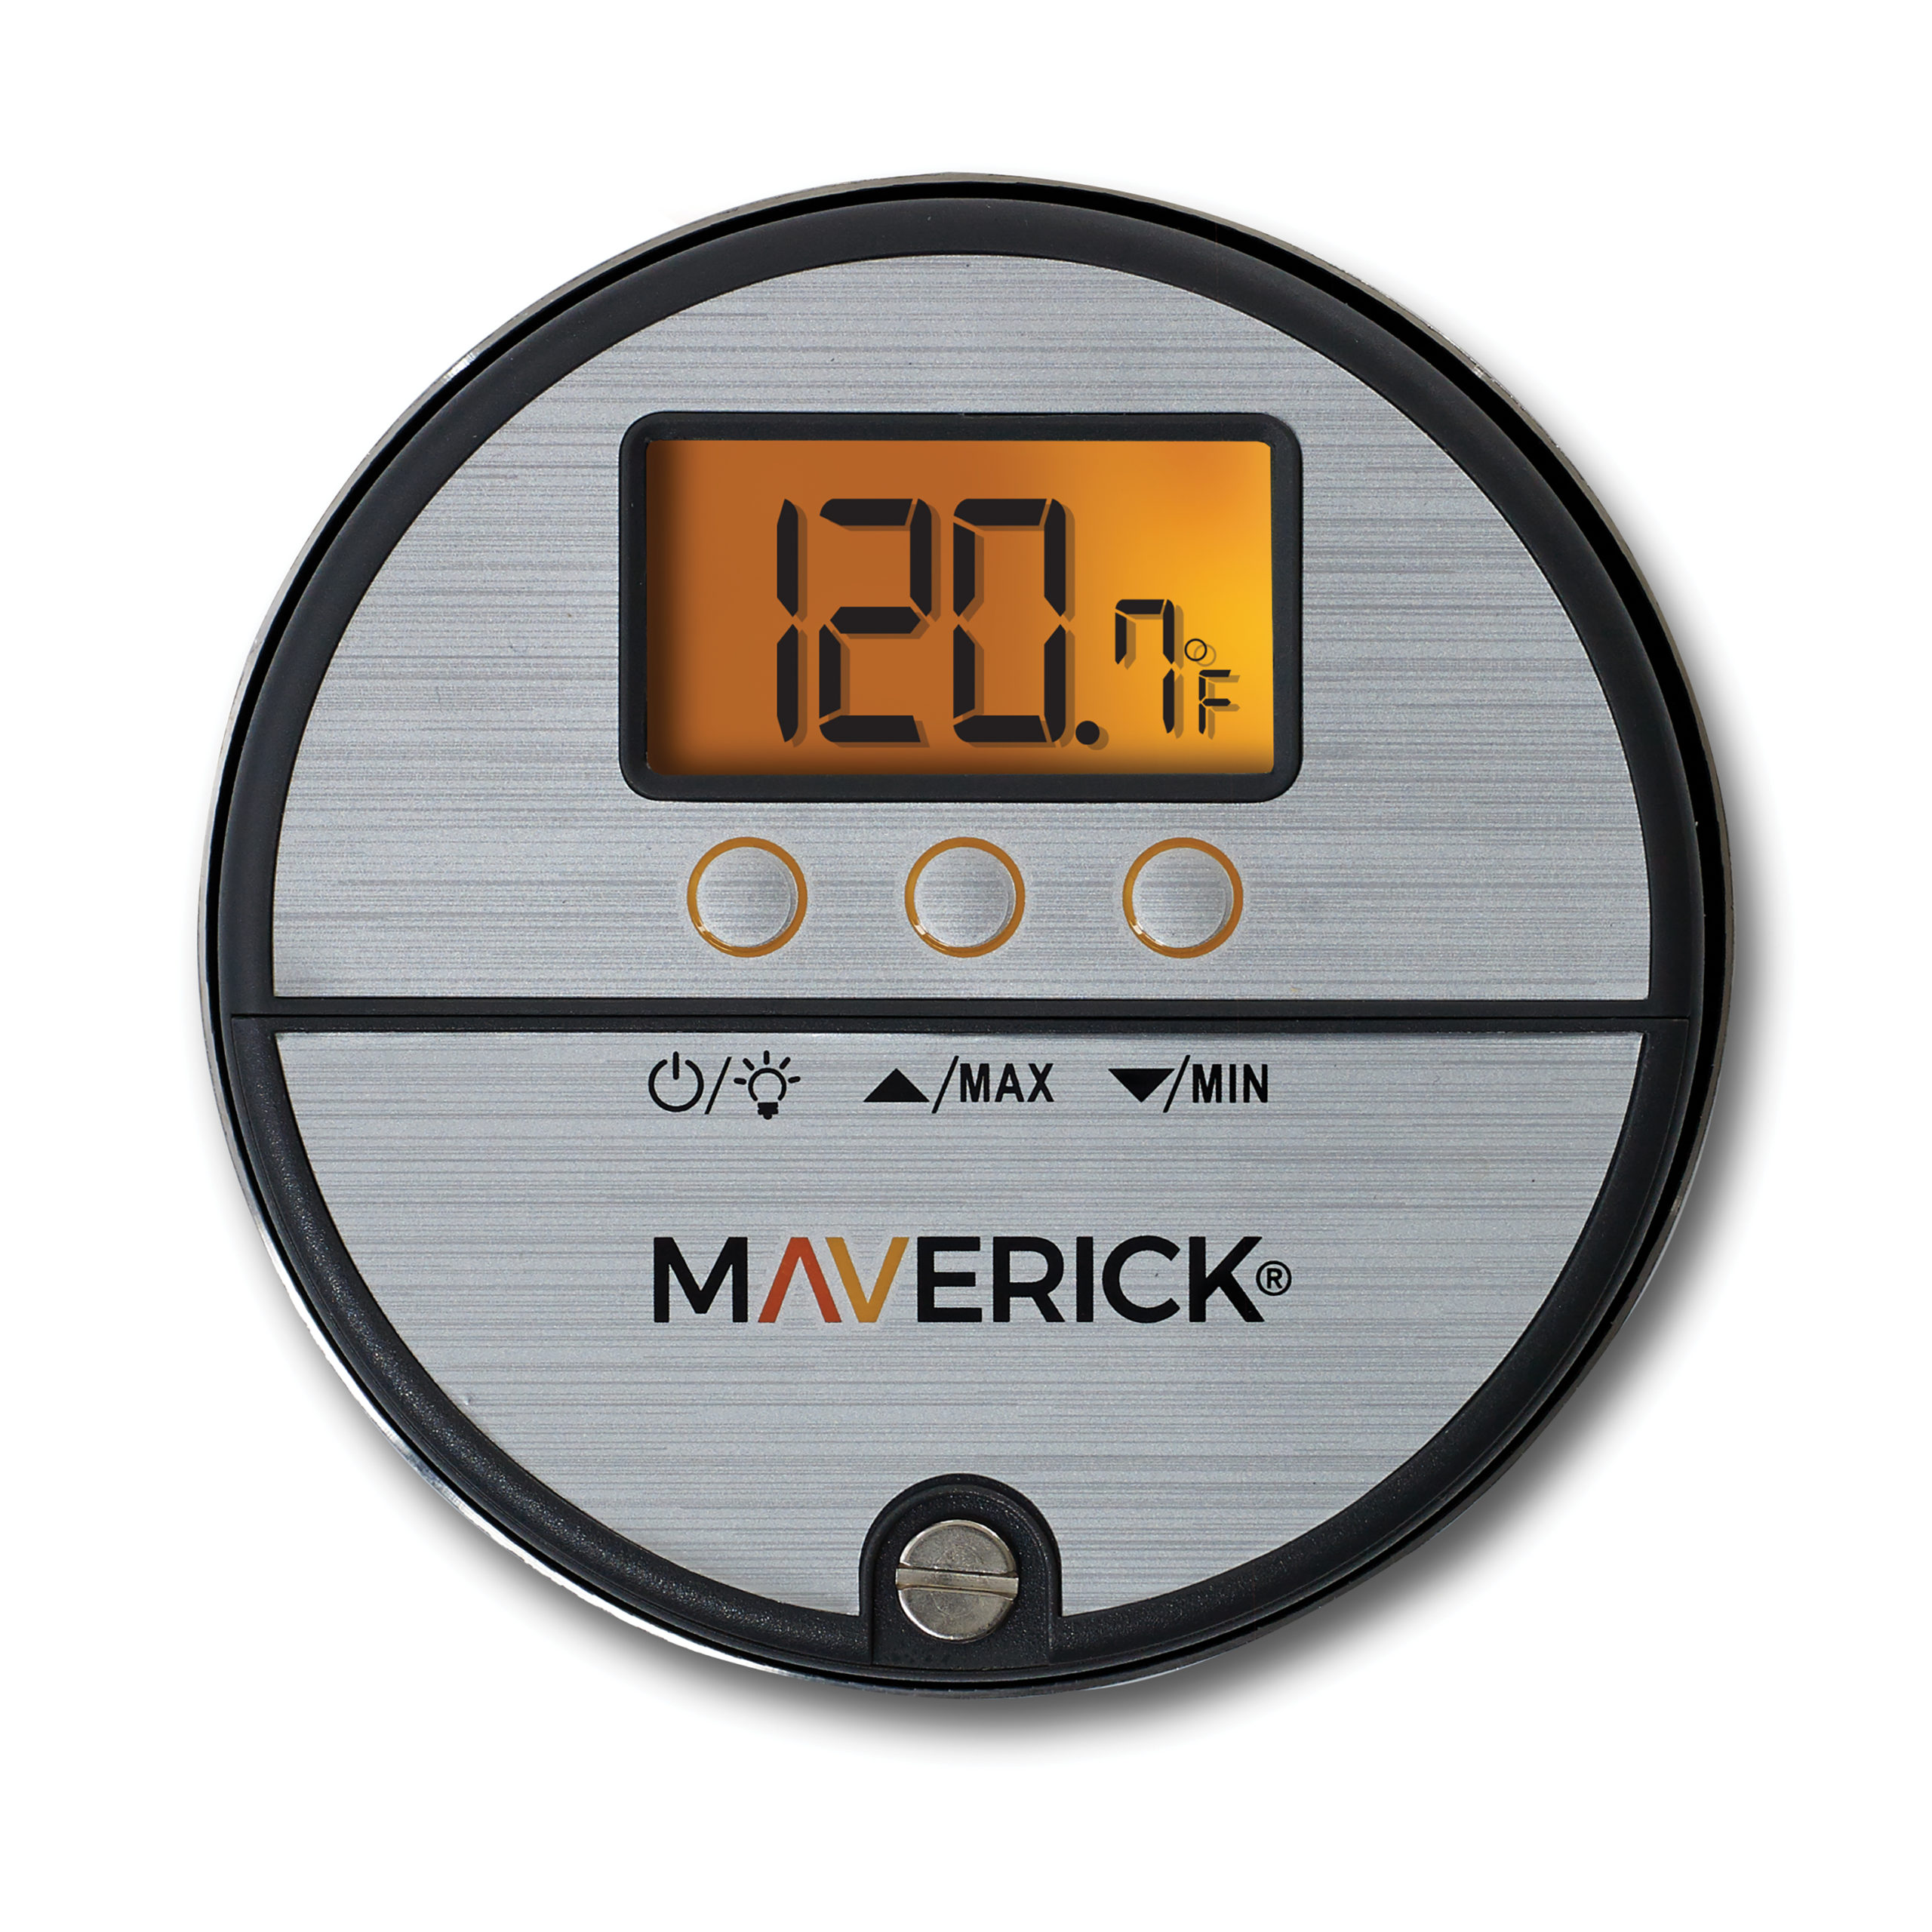 All Things Barbecue Digital Thermometer